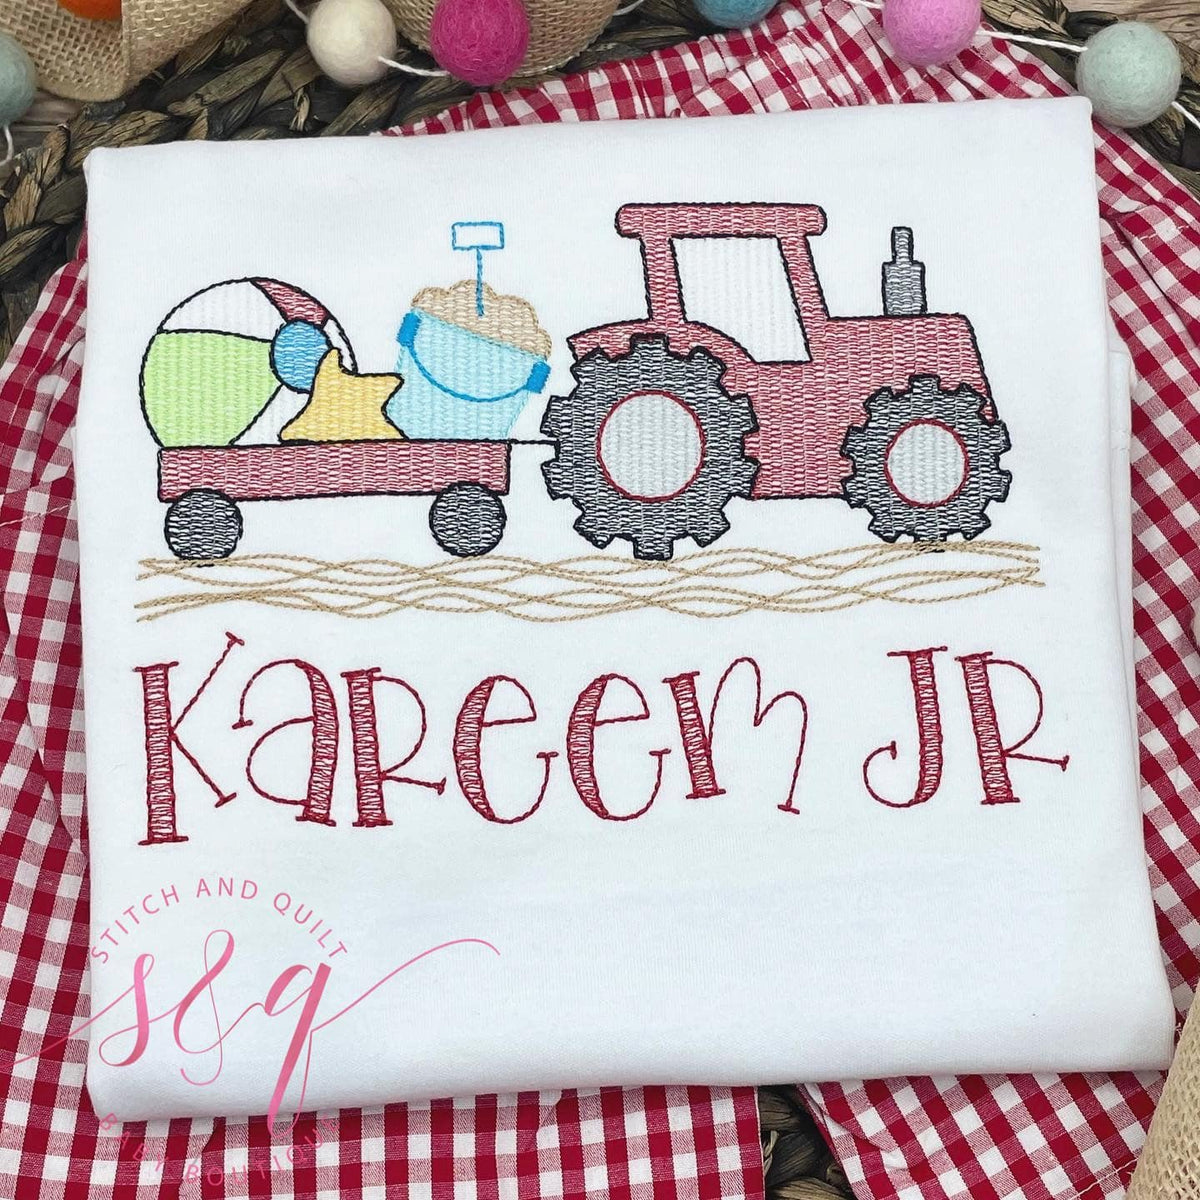 Red Tractor and Trailer Embroidered Boys Clothing Set with Beach Ball and Pail Design, Tractor for Boys, Boys Summer outfit